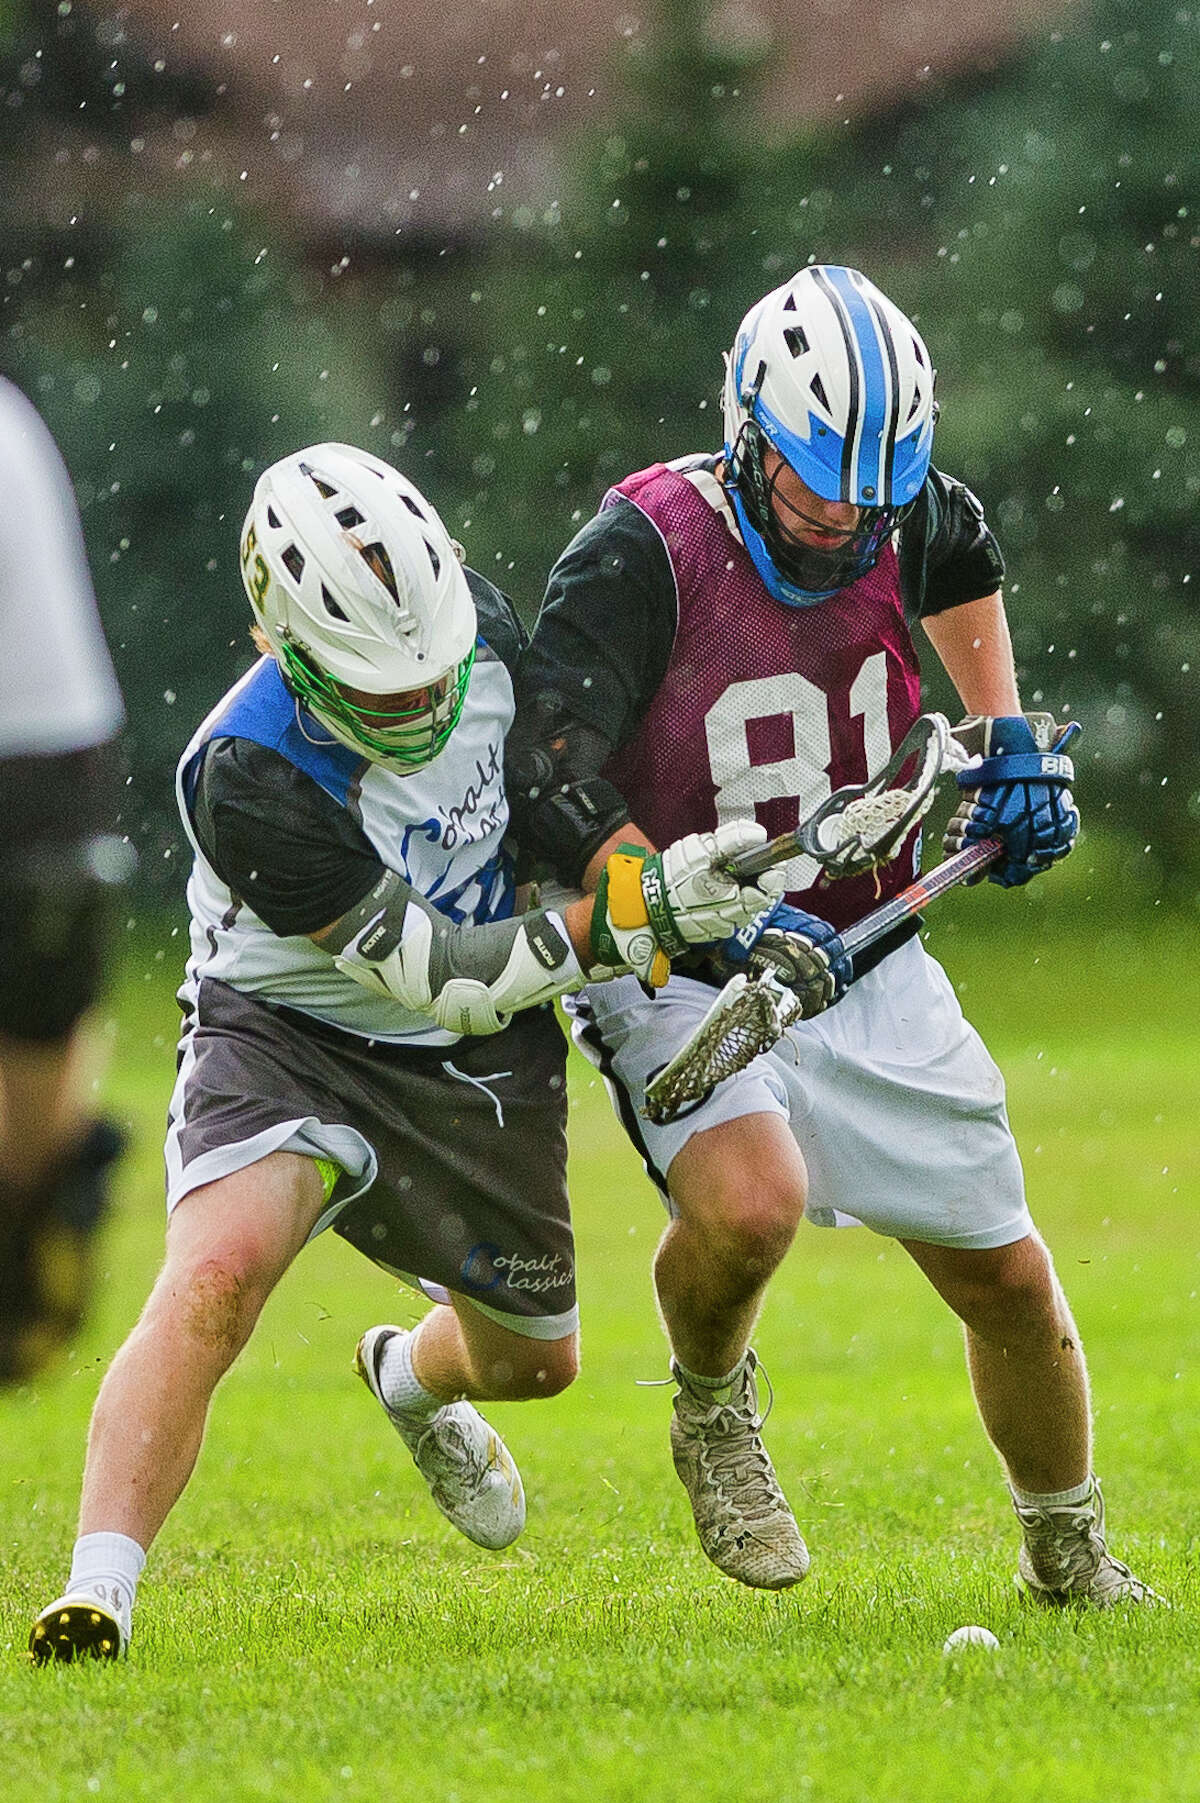 Momentum Lacrosse Black's Ryan Slank of Rochester Hills, right, fights for possession with a Cobalt Classics opponent, left, during the Great Lax Bay Classic on Saturday in Saginaw.